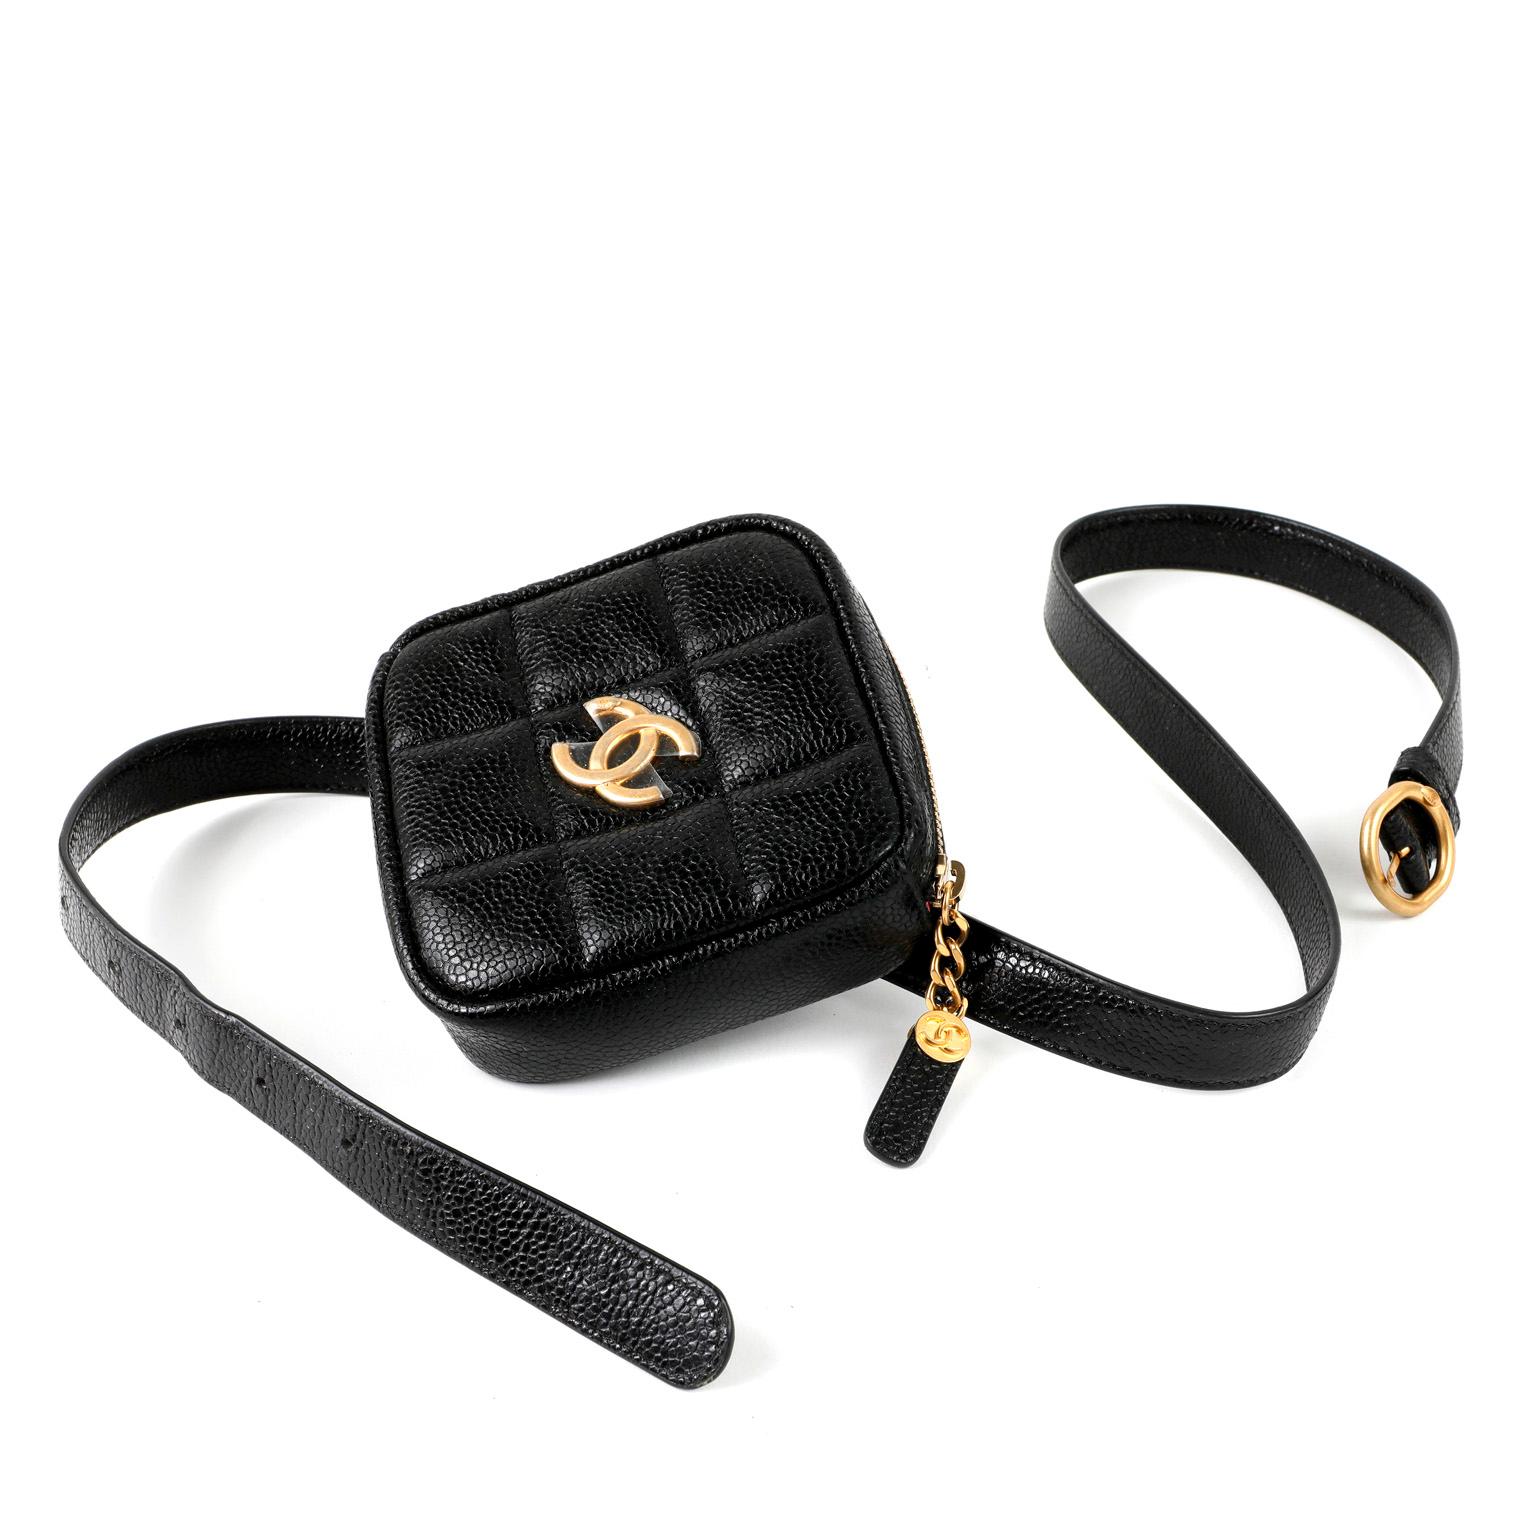 This authentic Chanel Black Caviar Leather Belt Bag is in pristine unworn condition.  Black square quilted zip top pouch in durable textured glazed caviar leather is anchored to a coordinating belt.  Gold tone hardware.  Adjustable length.  Dust bag